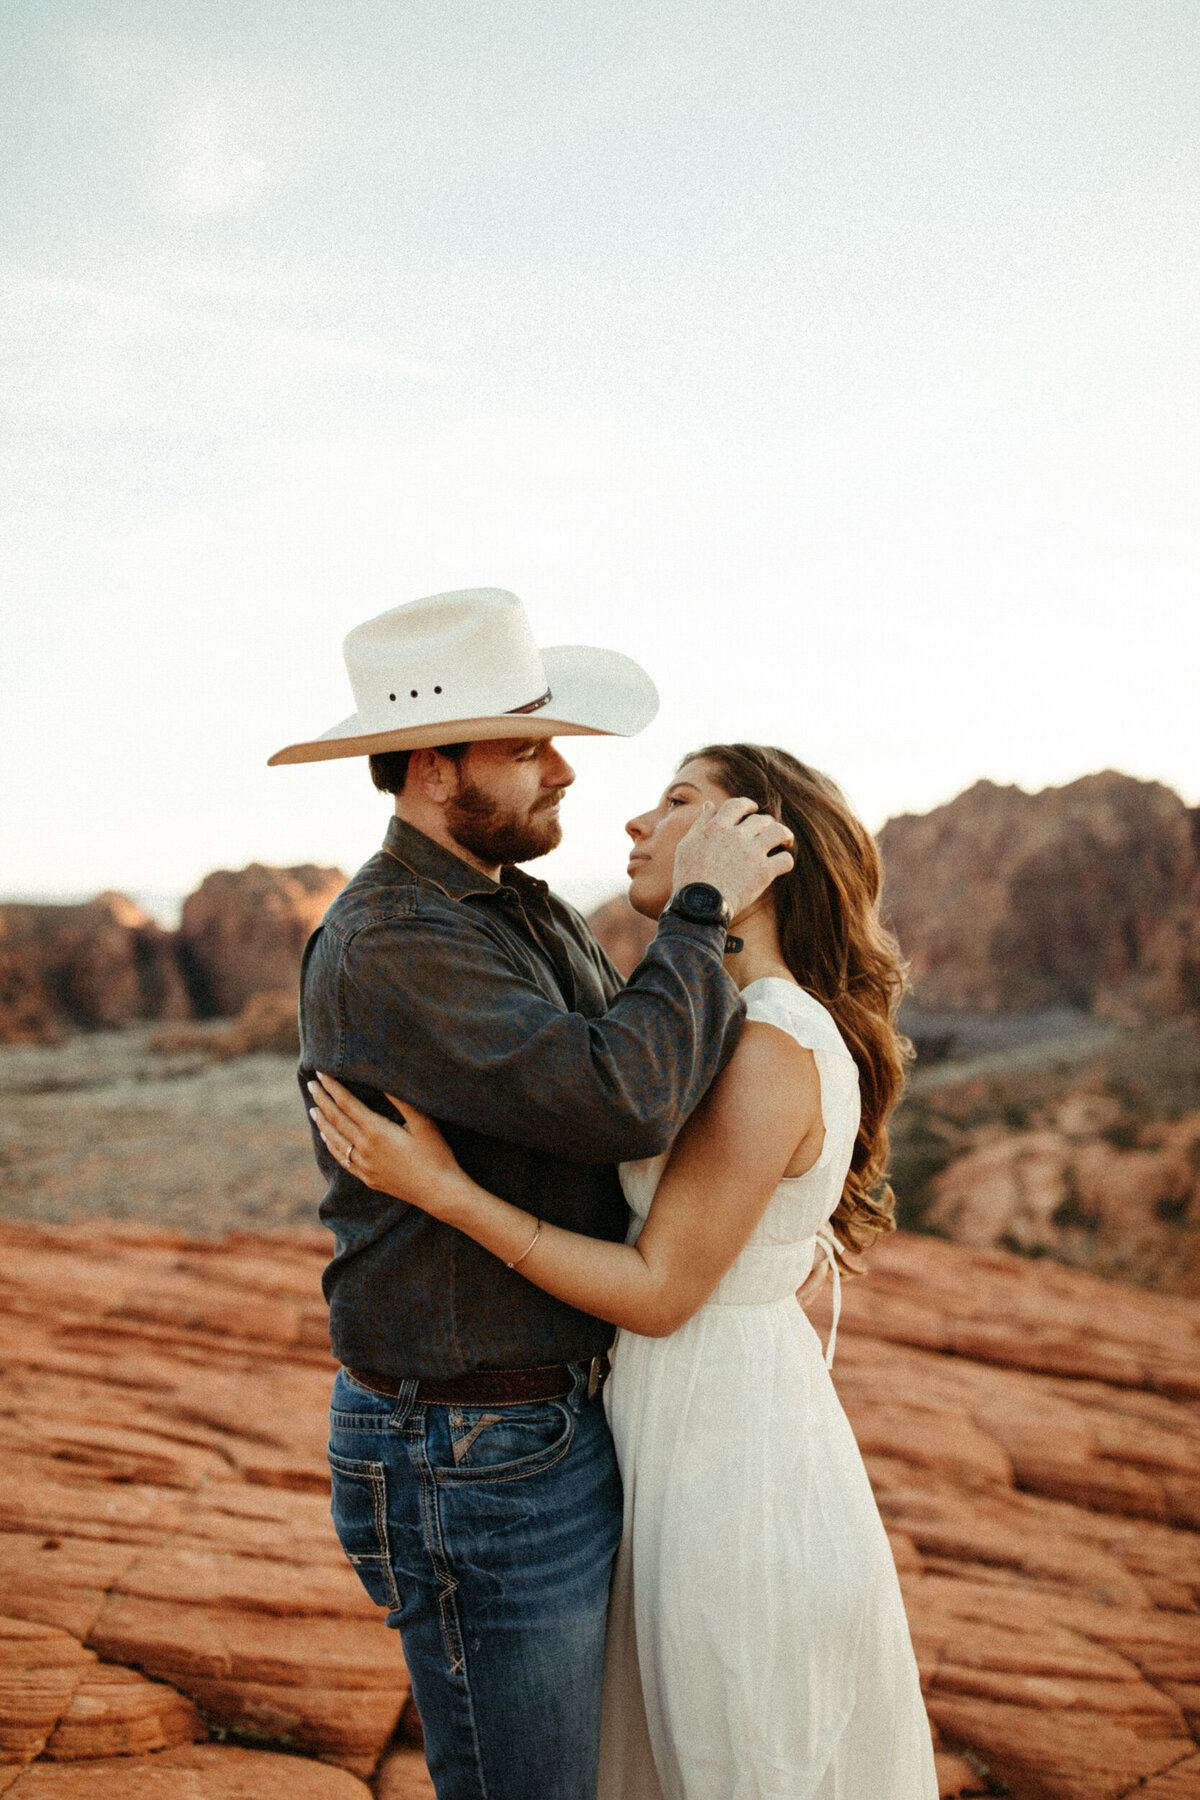 Guy in cowboy hat pulling back his fiancé's hair in the desert